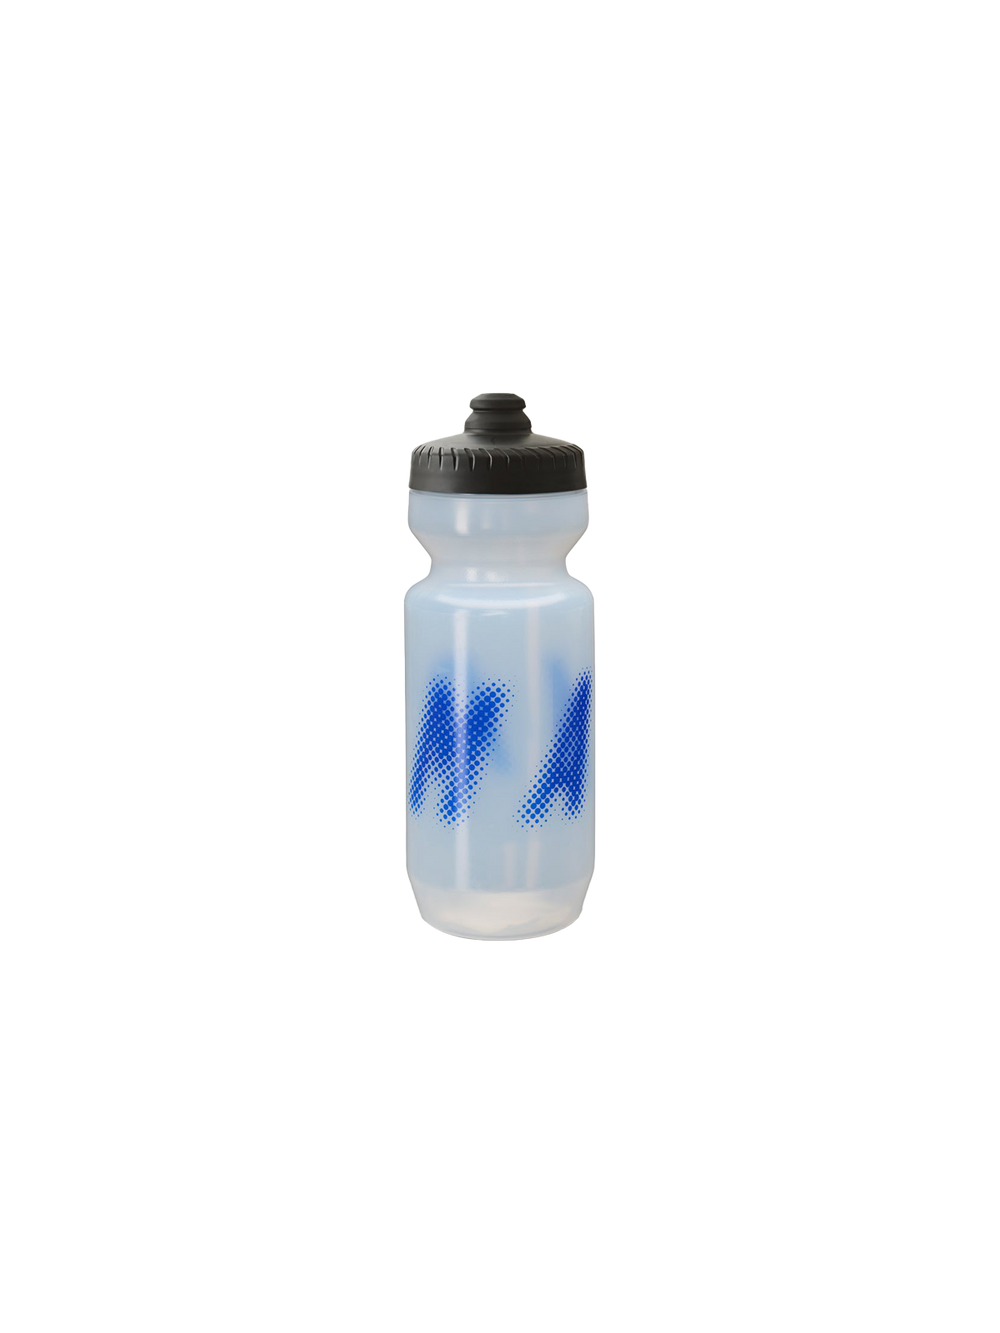 Product Image for Halftone Bottle